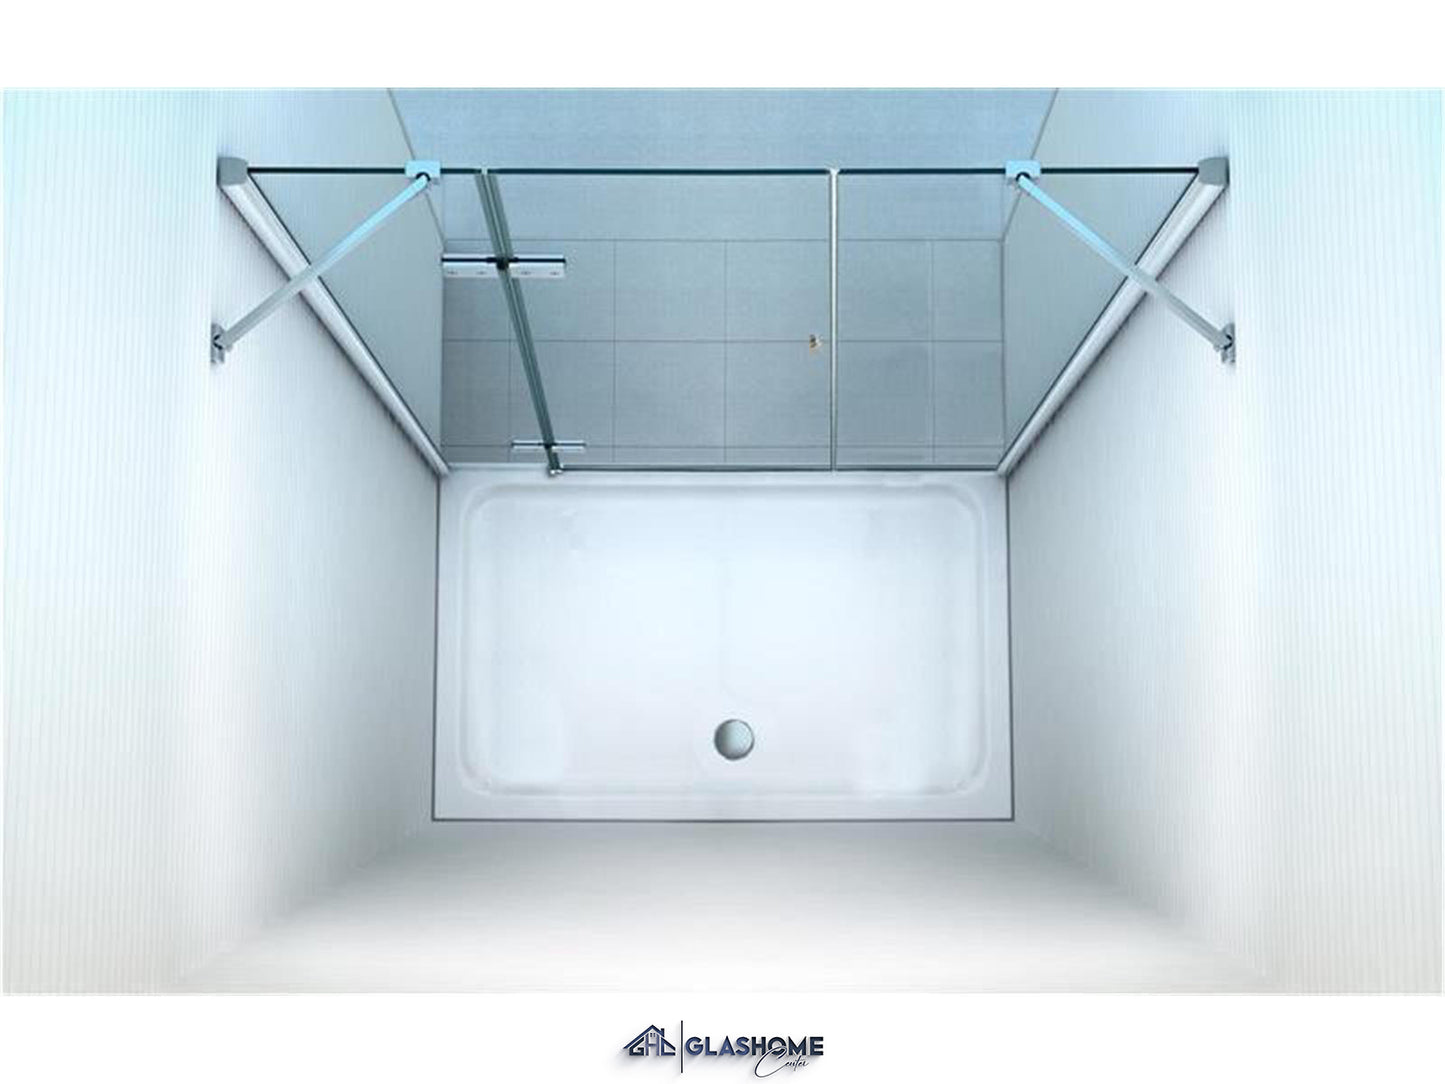 GlasHomeCenter - niche cabin New York (205 x 195 cm) - 8mm toughened safety glass - without shower tray